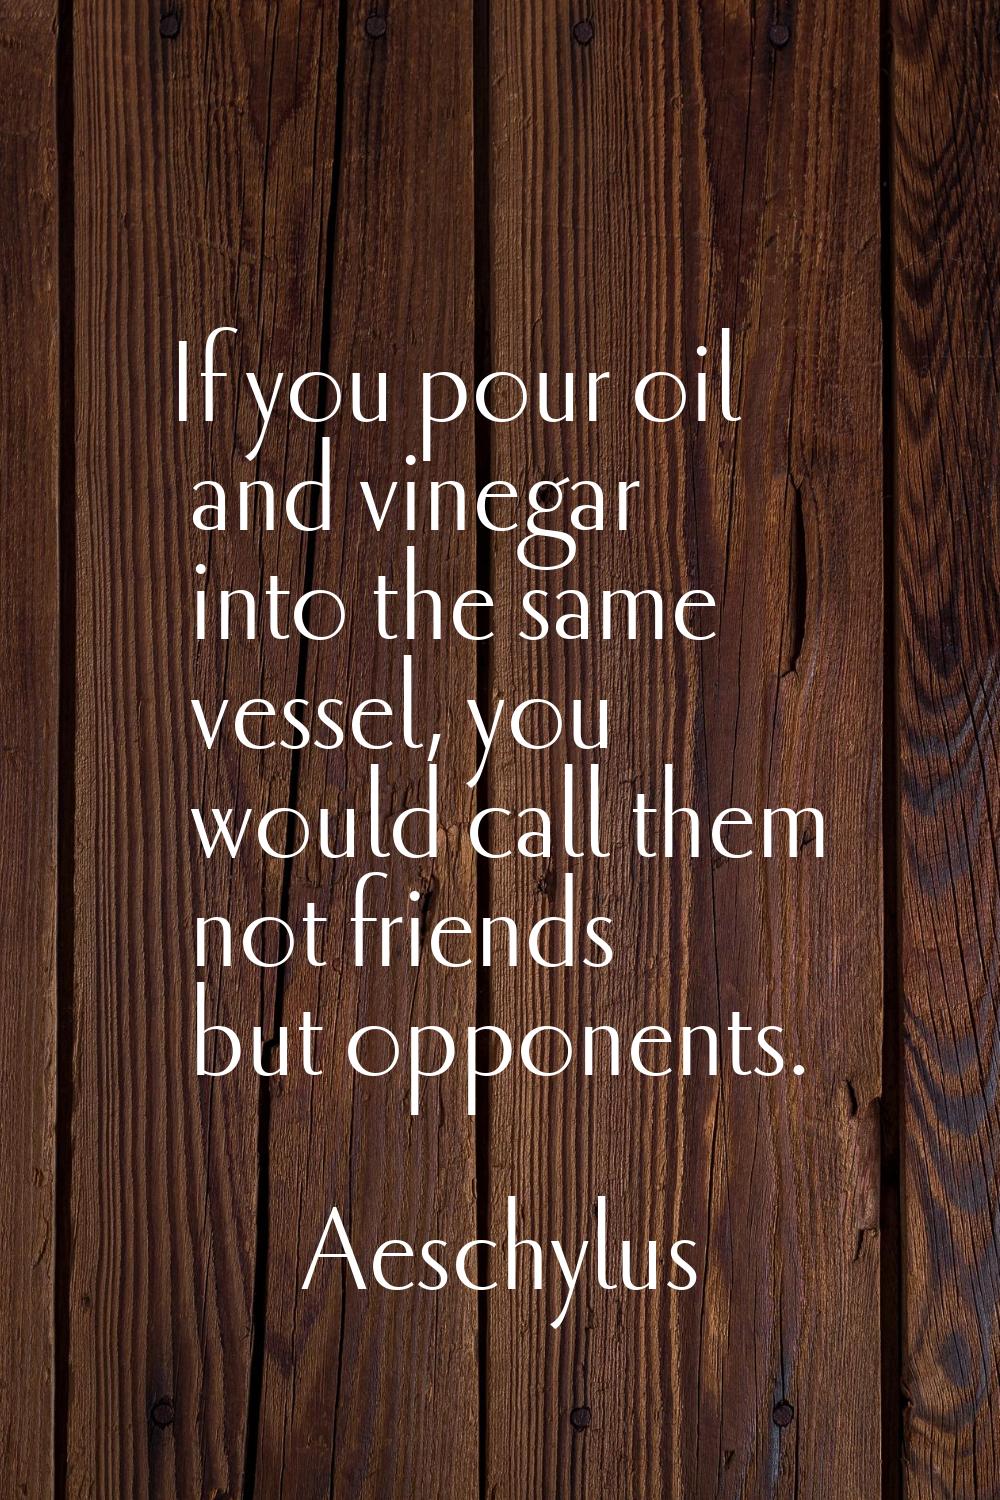 If you pour oil and vinegar into the same vessel, you would call them not friends but opponents.